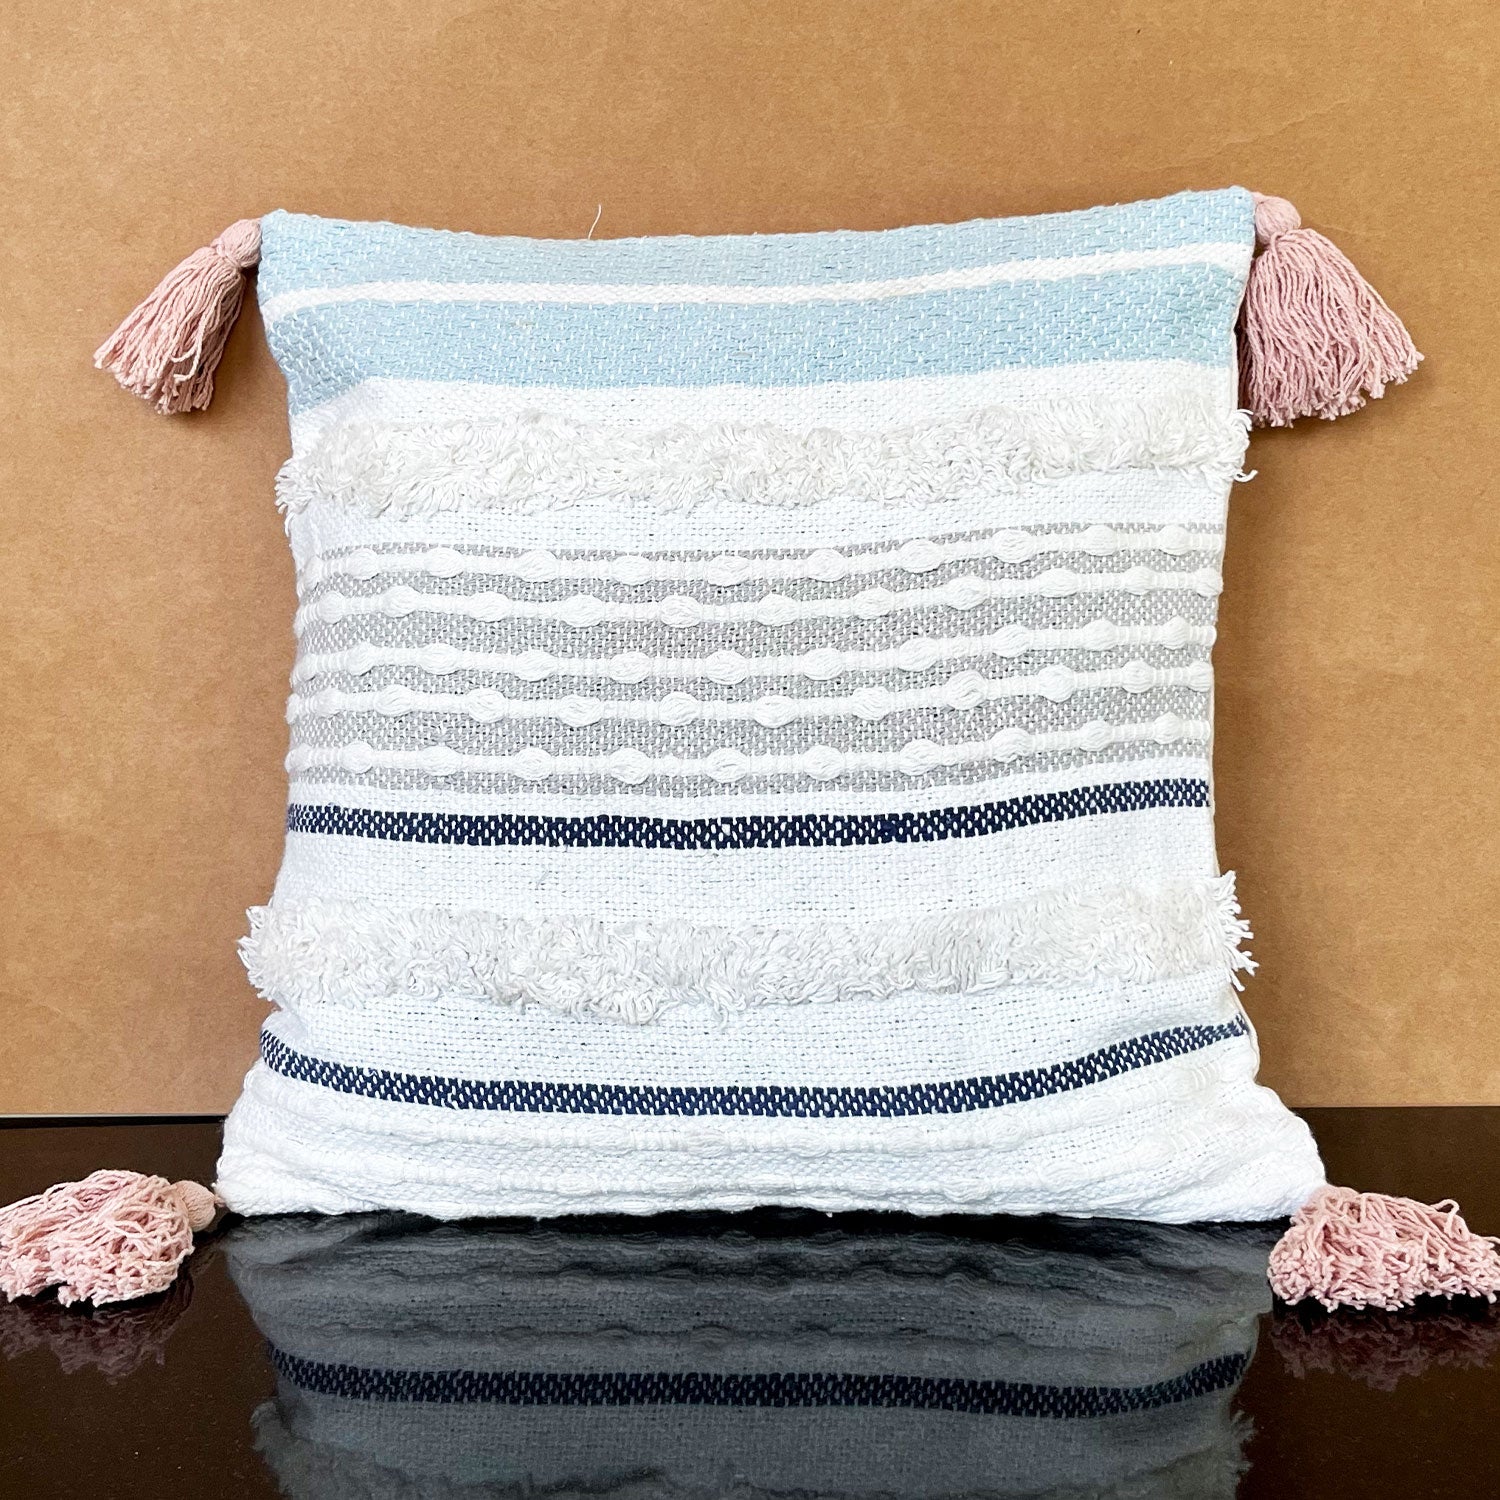 Designer Cotton Cushion Cover with Tassels- 16 x 16 inches